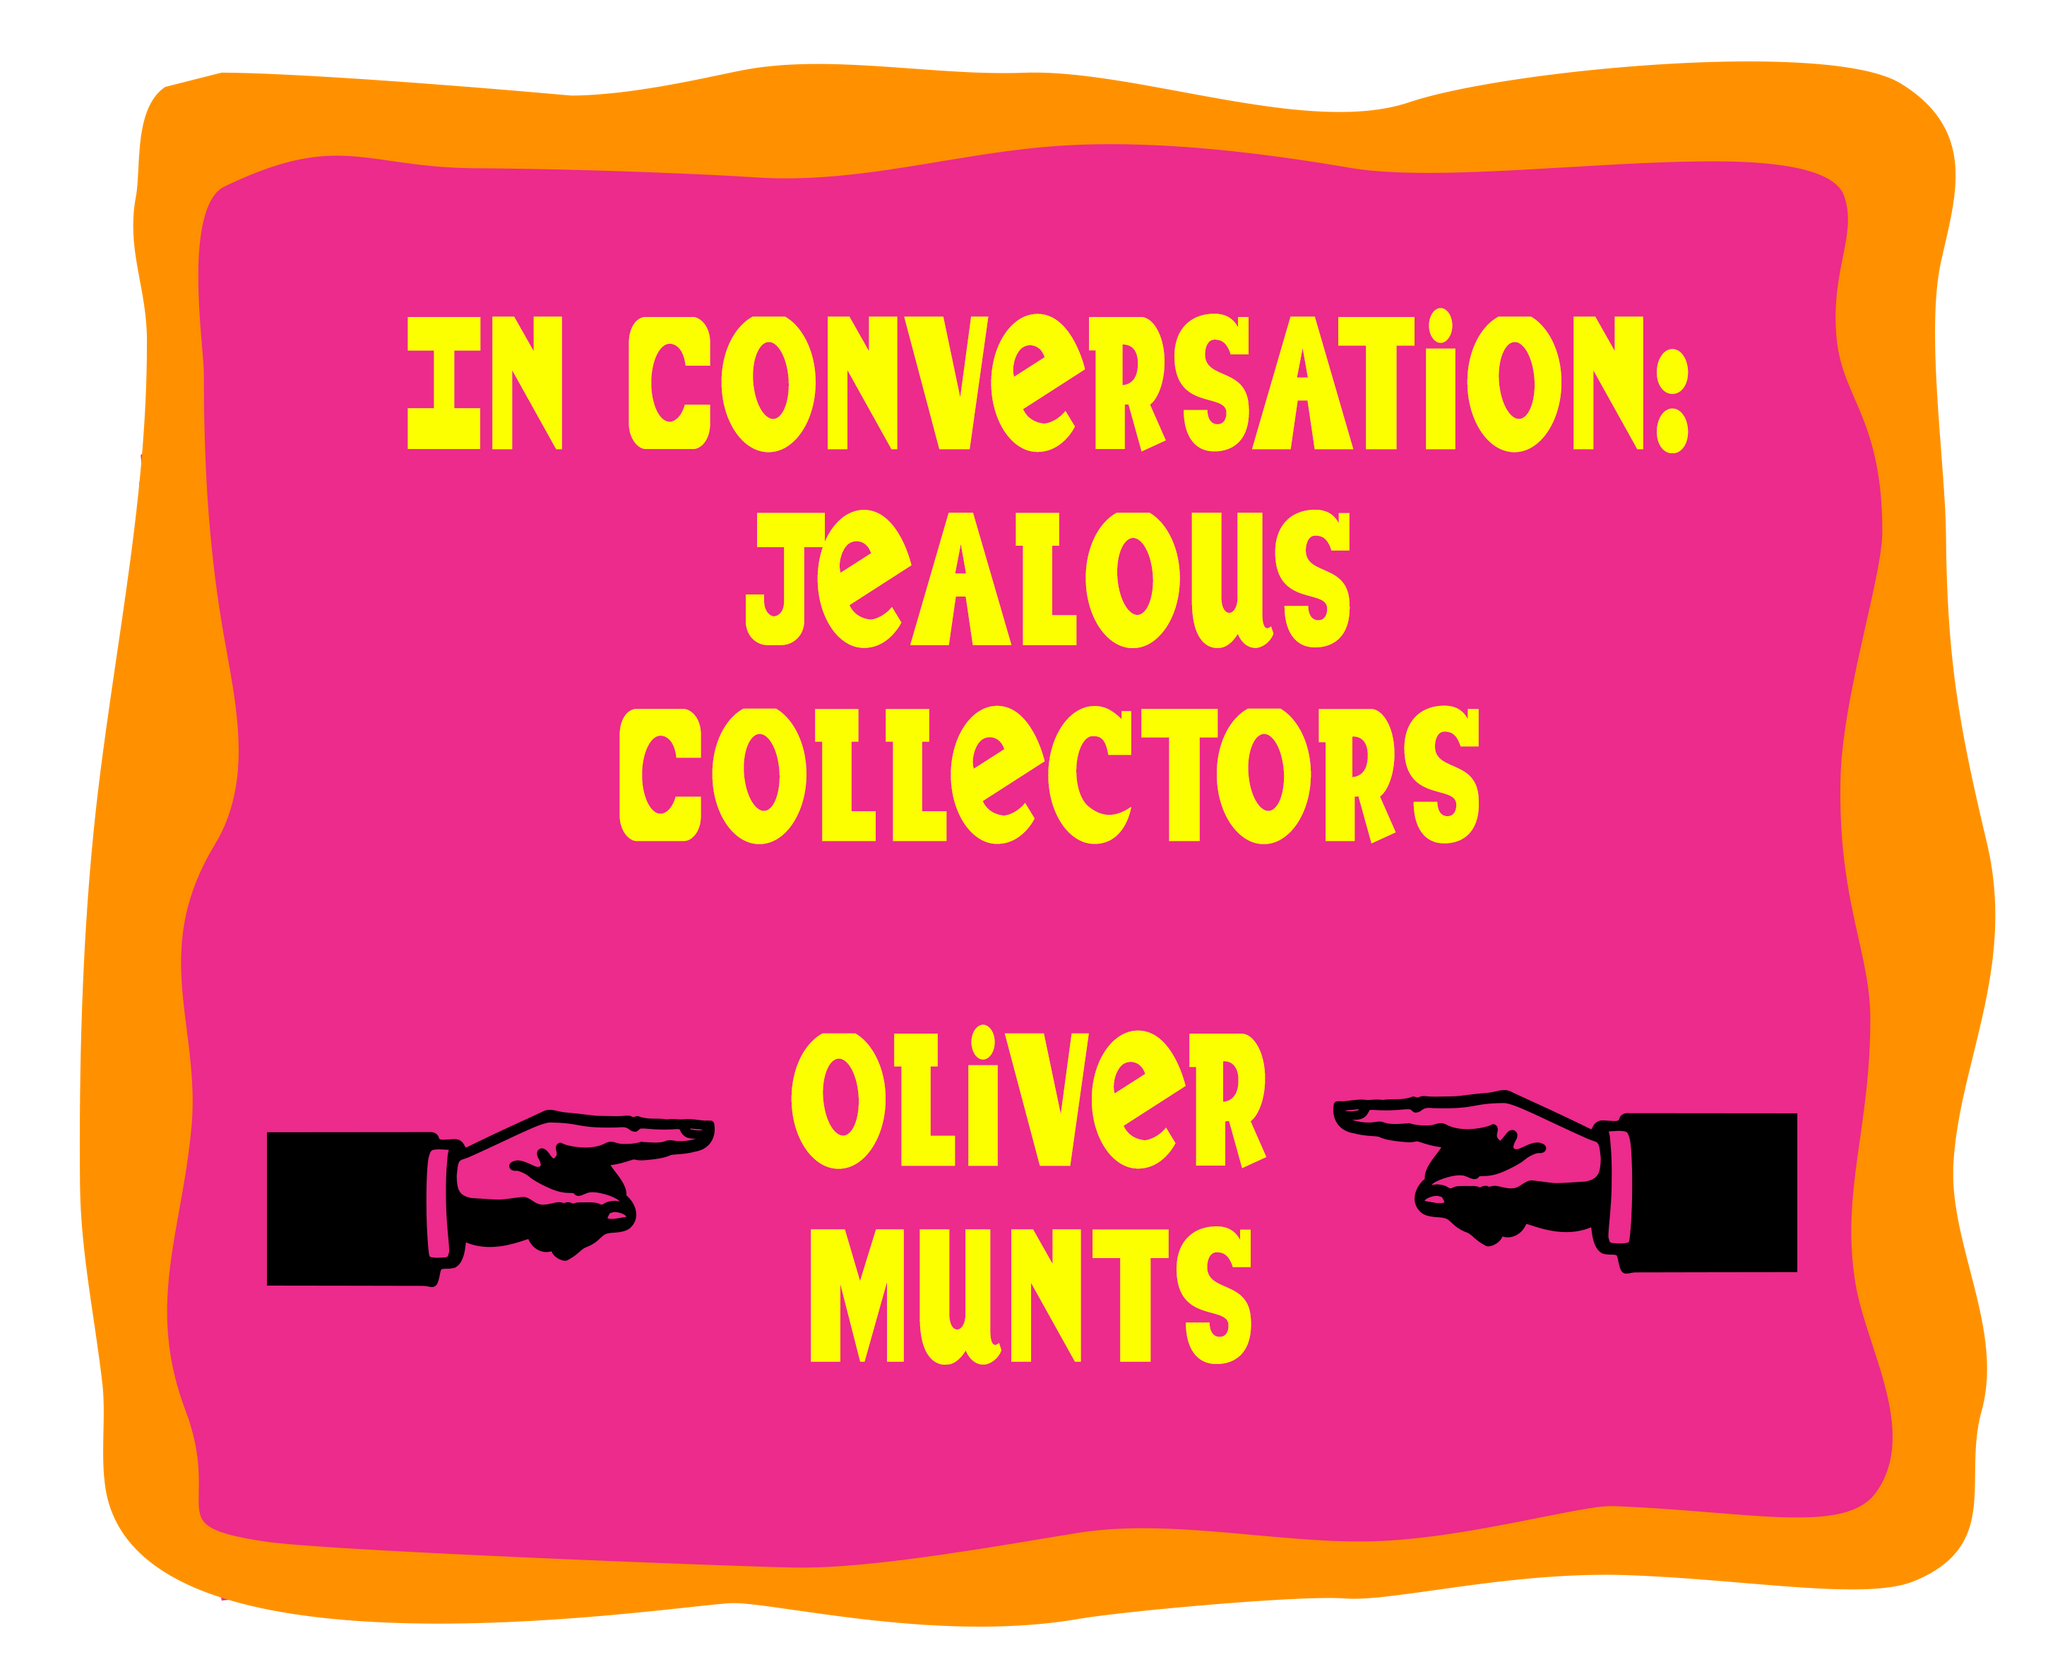 Jealous sits down with Oliver Munts!